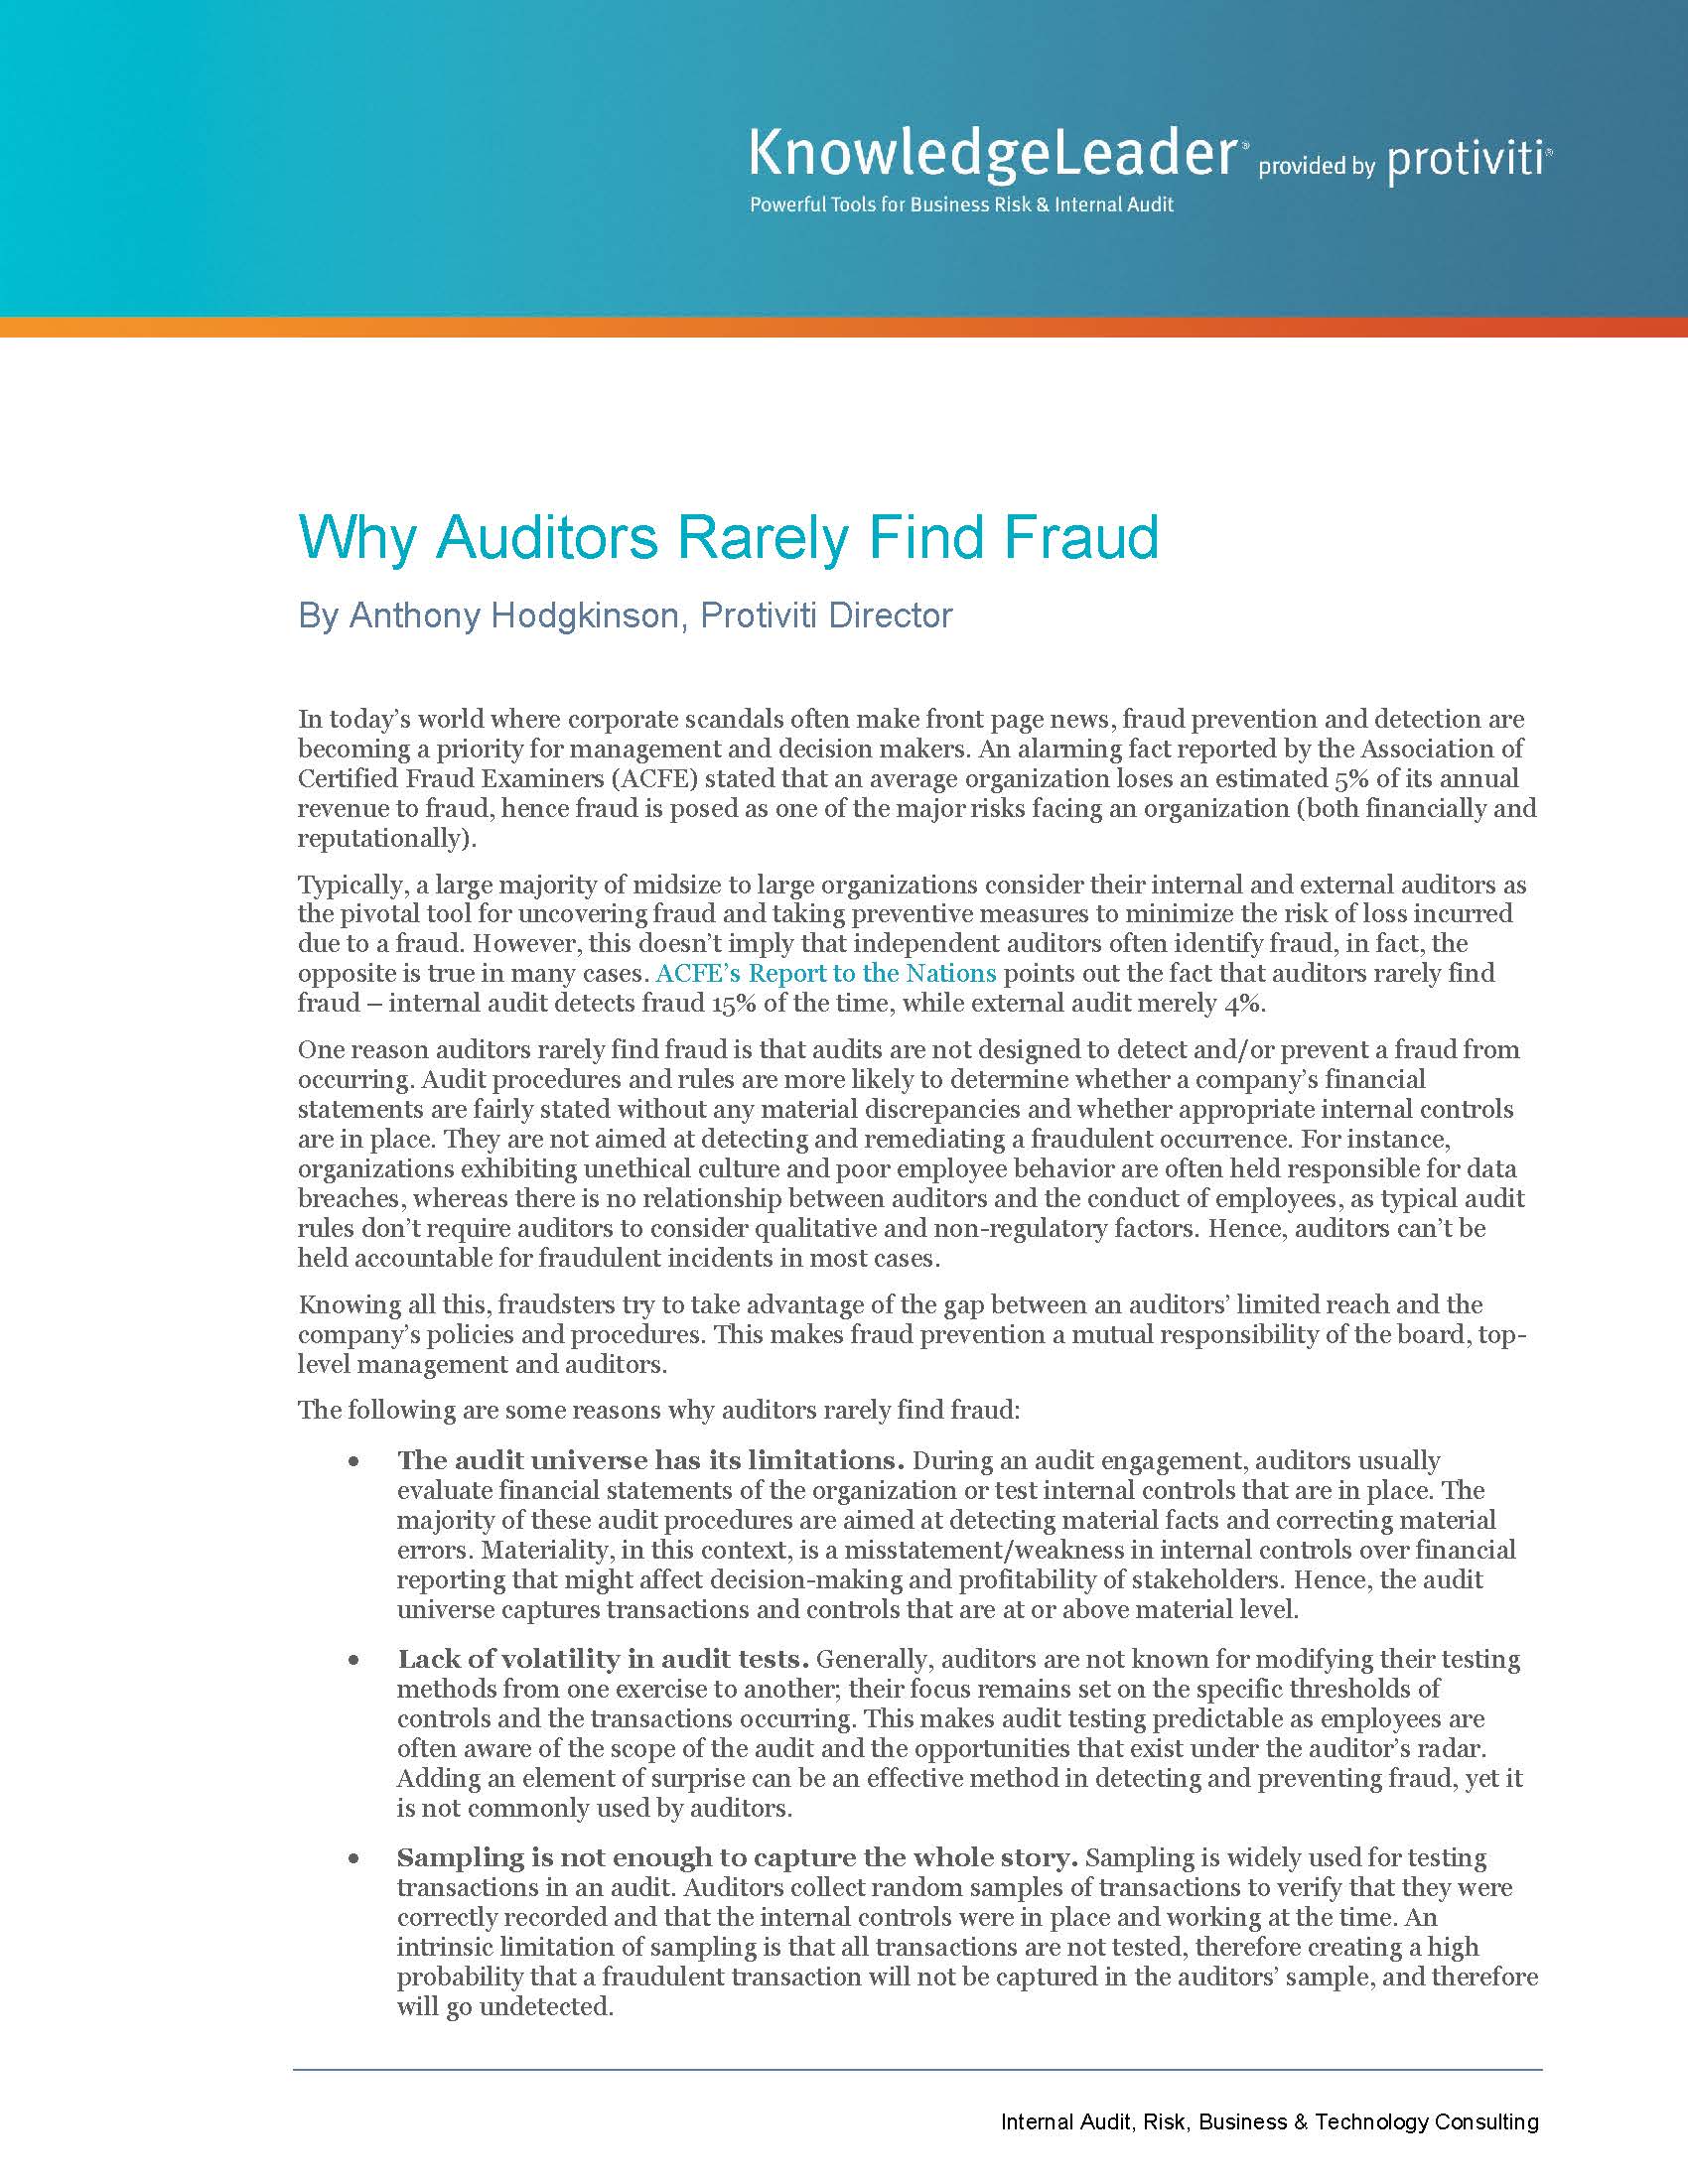 Screenshot of the first page of Why Auditors Rarely Find Fraud